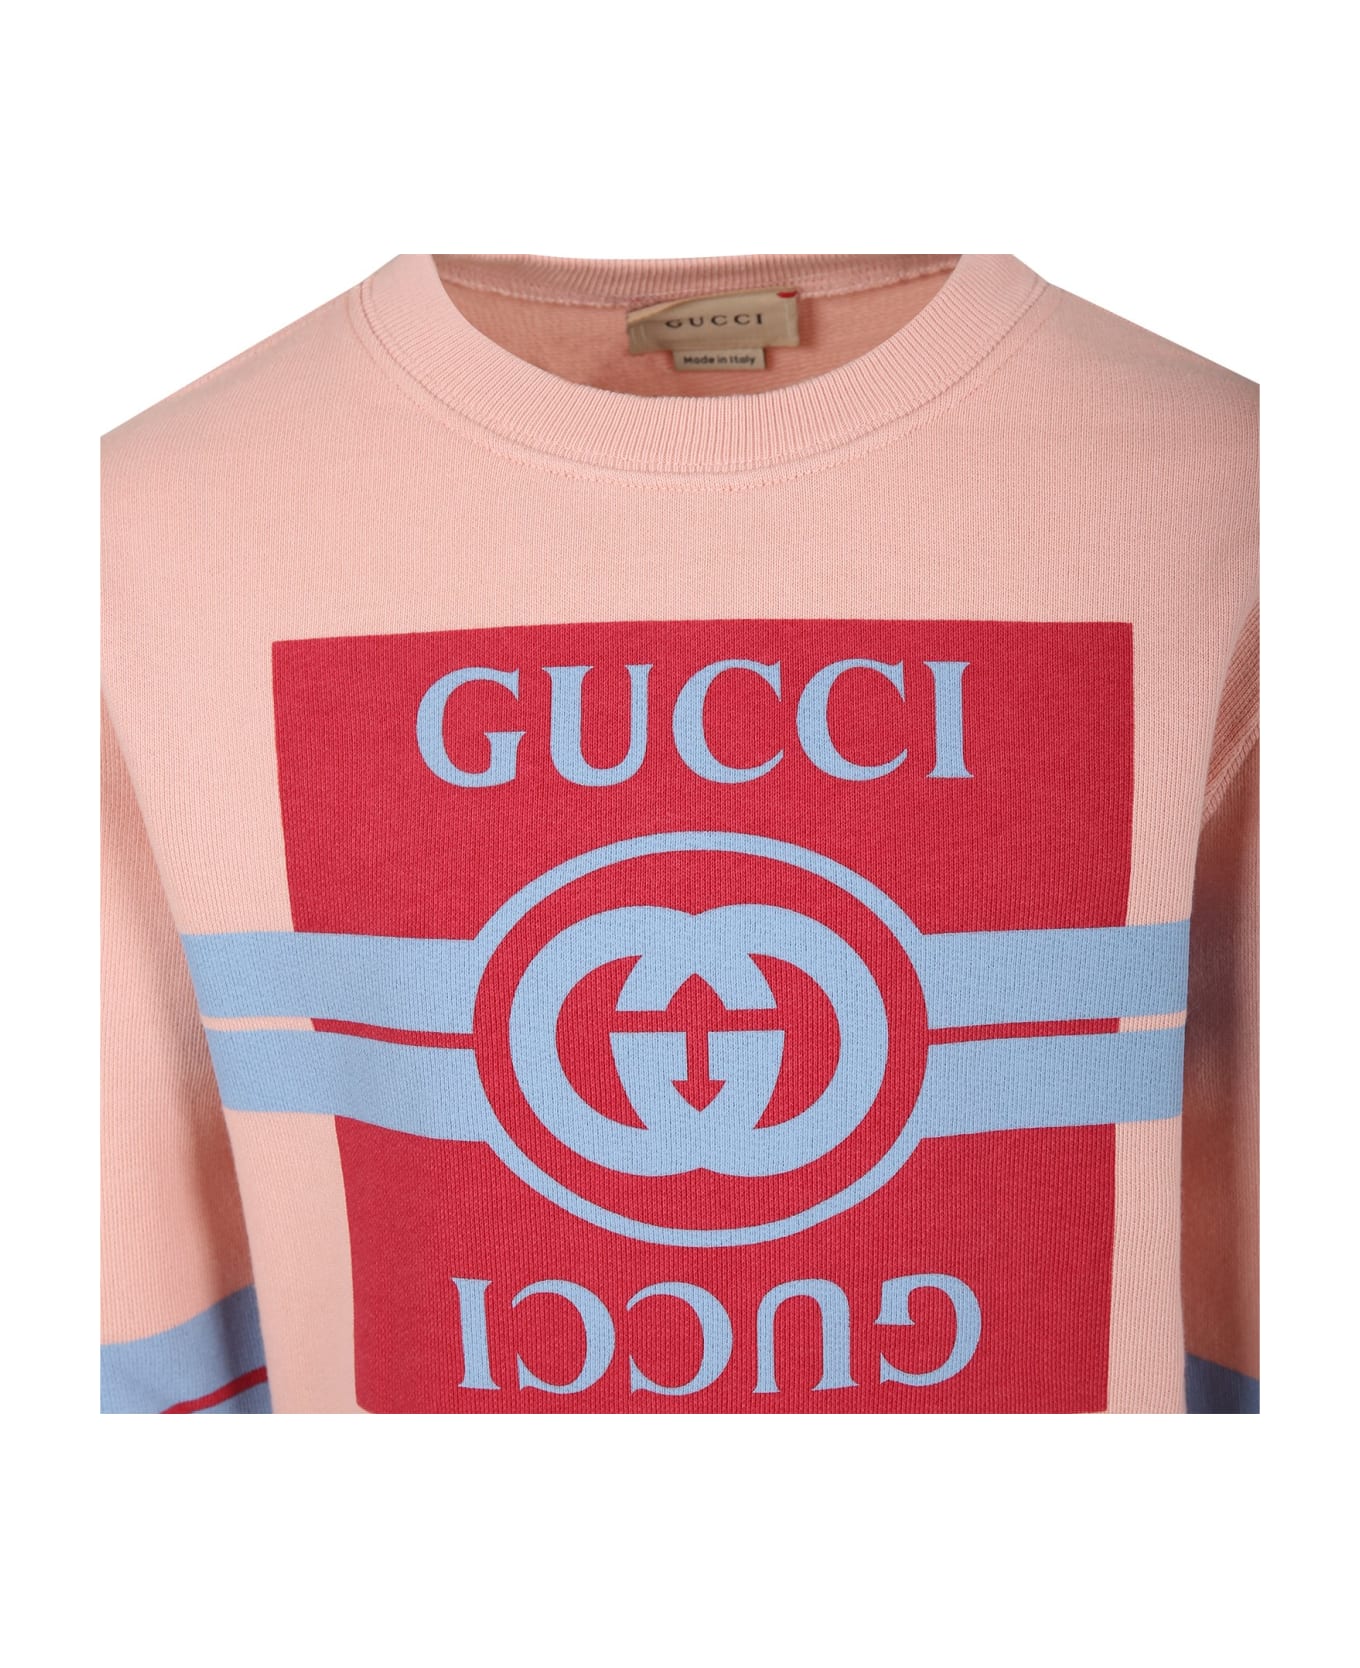 Gucci lame Rose Sweatshirt For Girl With Logo - PINK